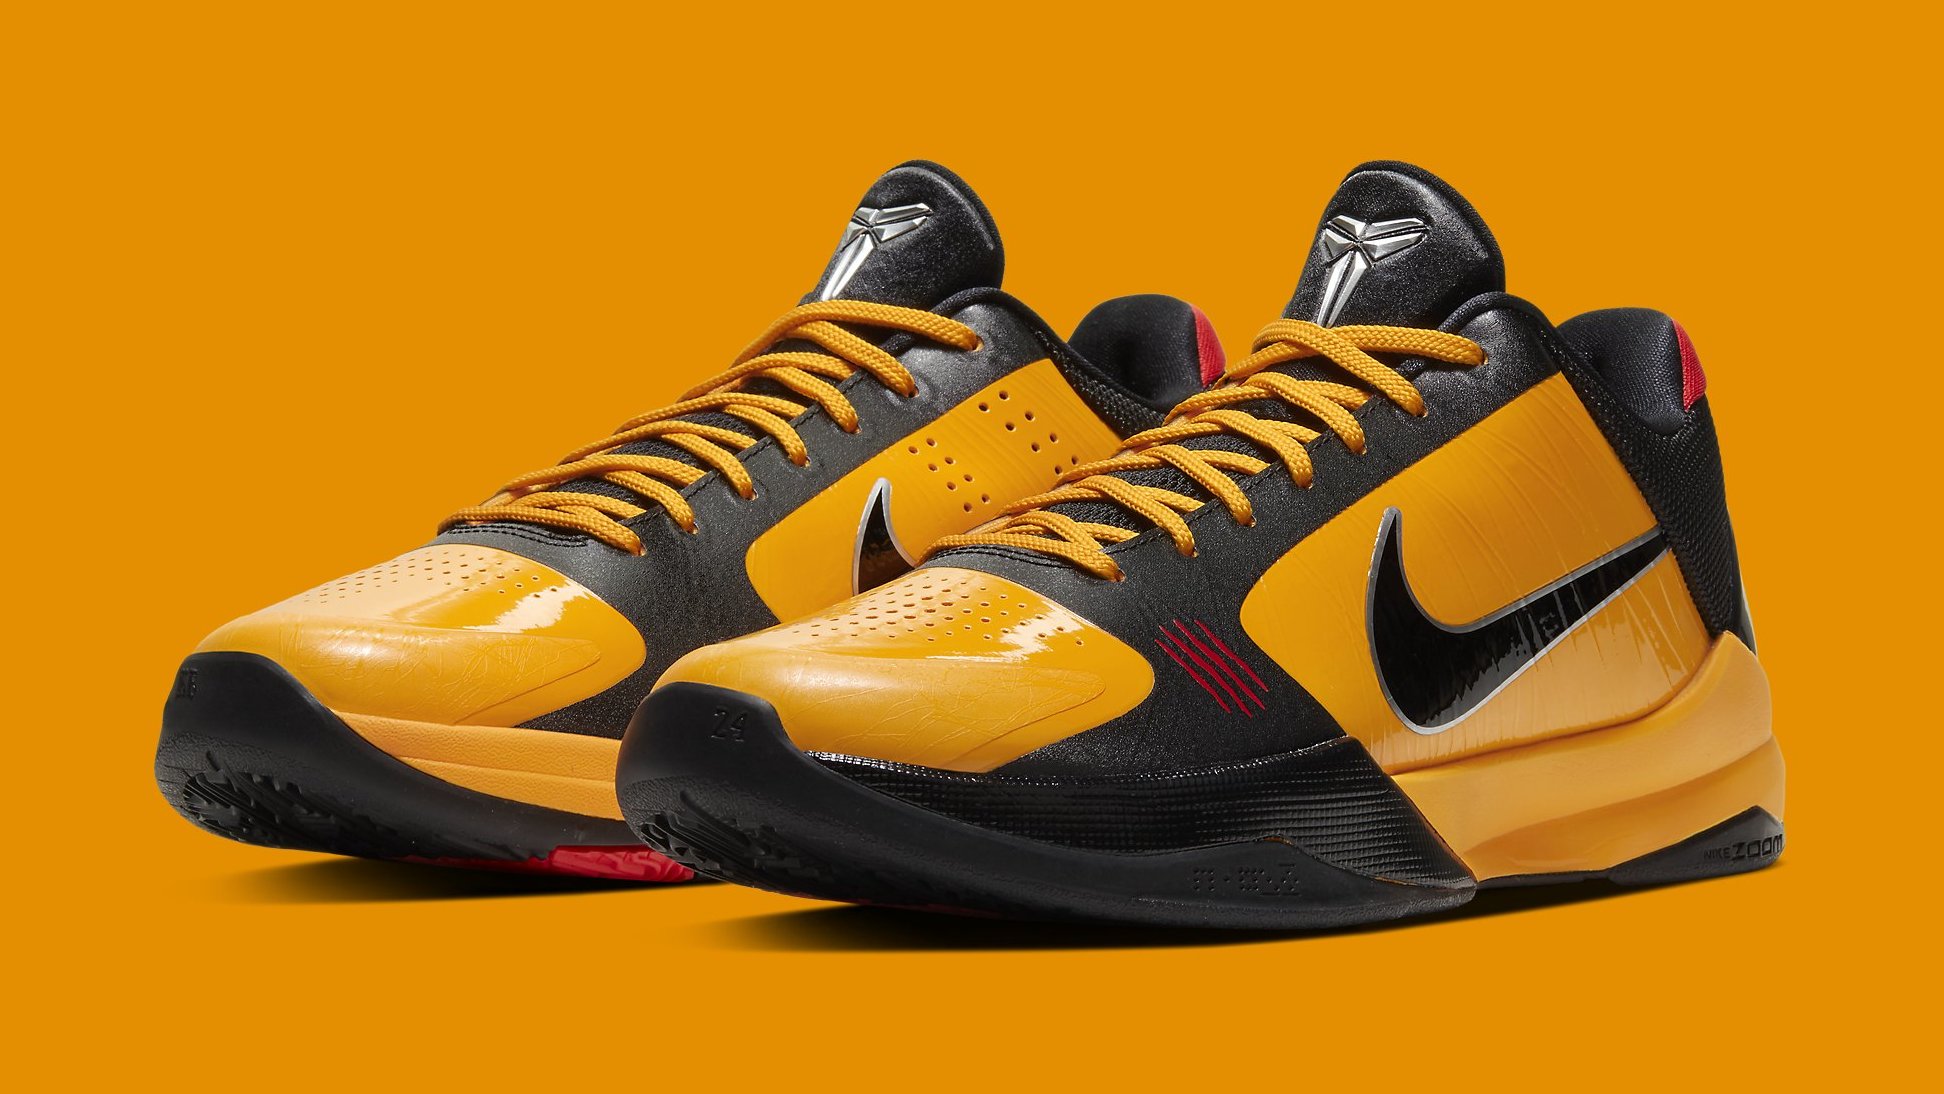 The 'Bruce Lee' Kobe 5 Protro Releasing Sooner Than Expected | Complex